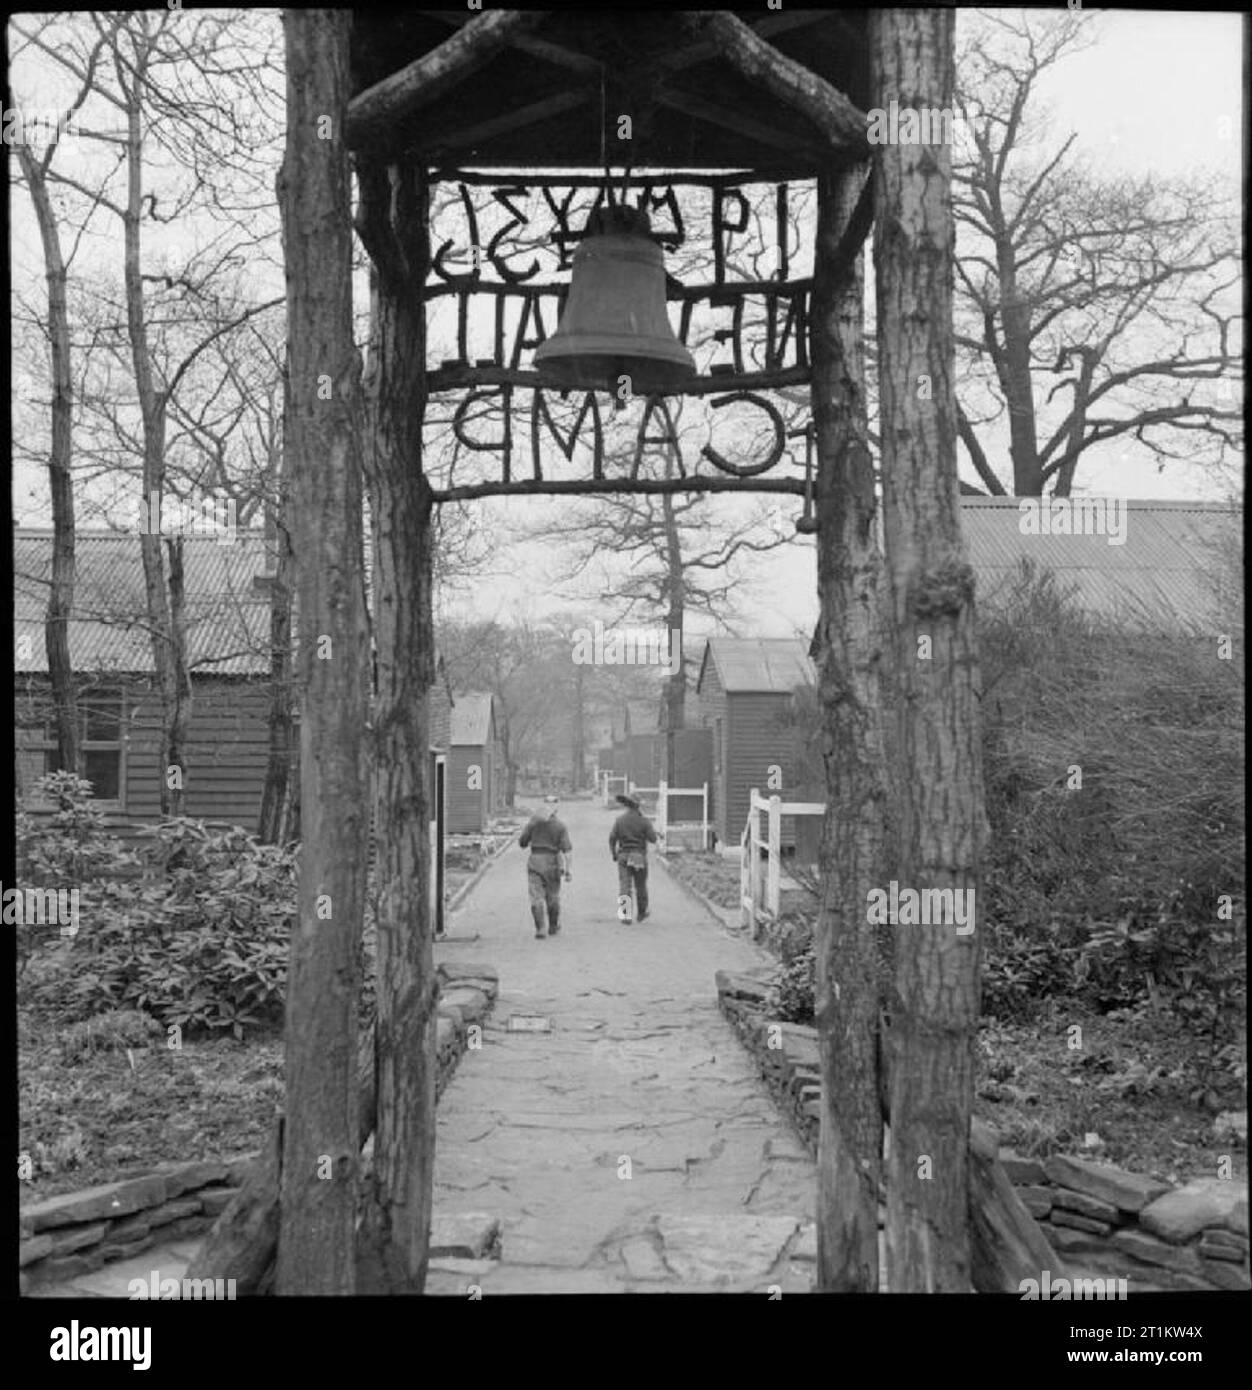 Wakefield Training Prison and Camp- Everyday Life in a British Prison, Wakefield, Yorkshire, England, 1944 The entrance to New Hall Camp at Wakefield Training Prison. Two inmates walk down the path towards their huts, carrying garden tools. According to the original caption, the land for this camp was acquired in 1933. 'Parties of prisoners conveyed daily from Wakefield Prison cleared the woodland for cultivation and gradually erected the camp'. Stock Photo